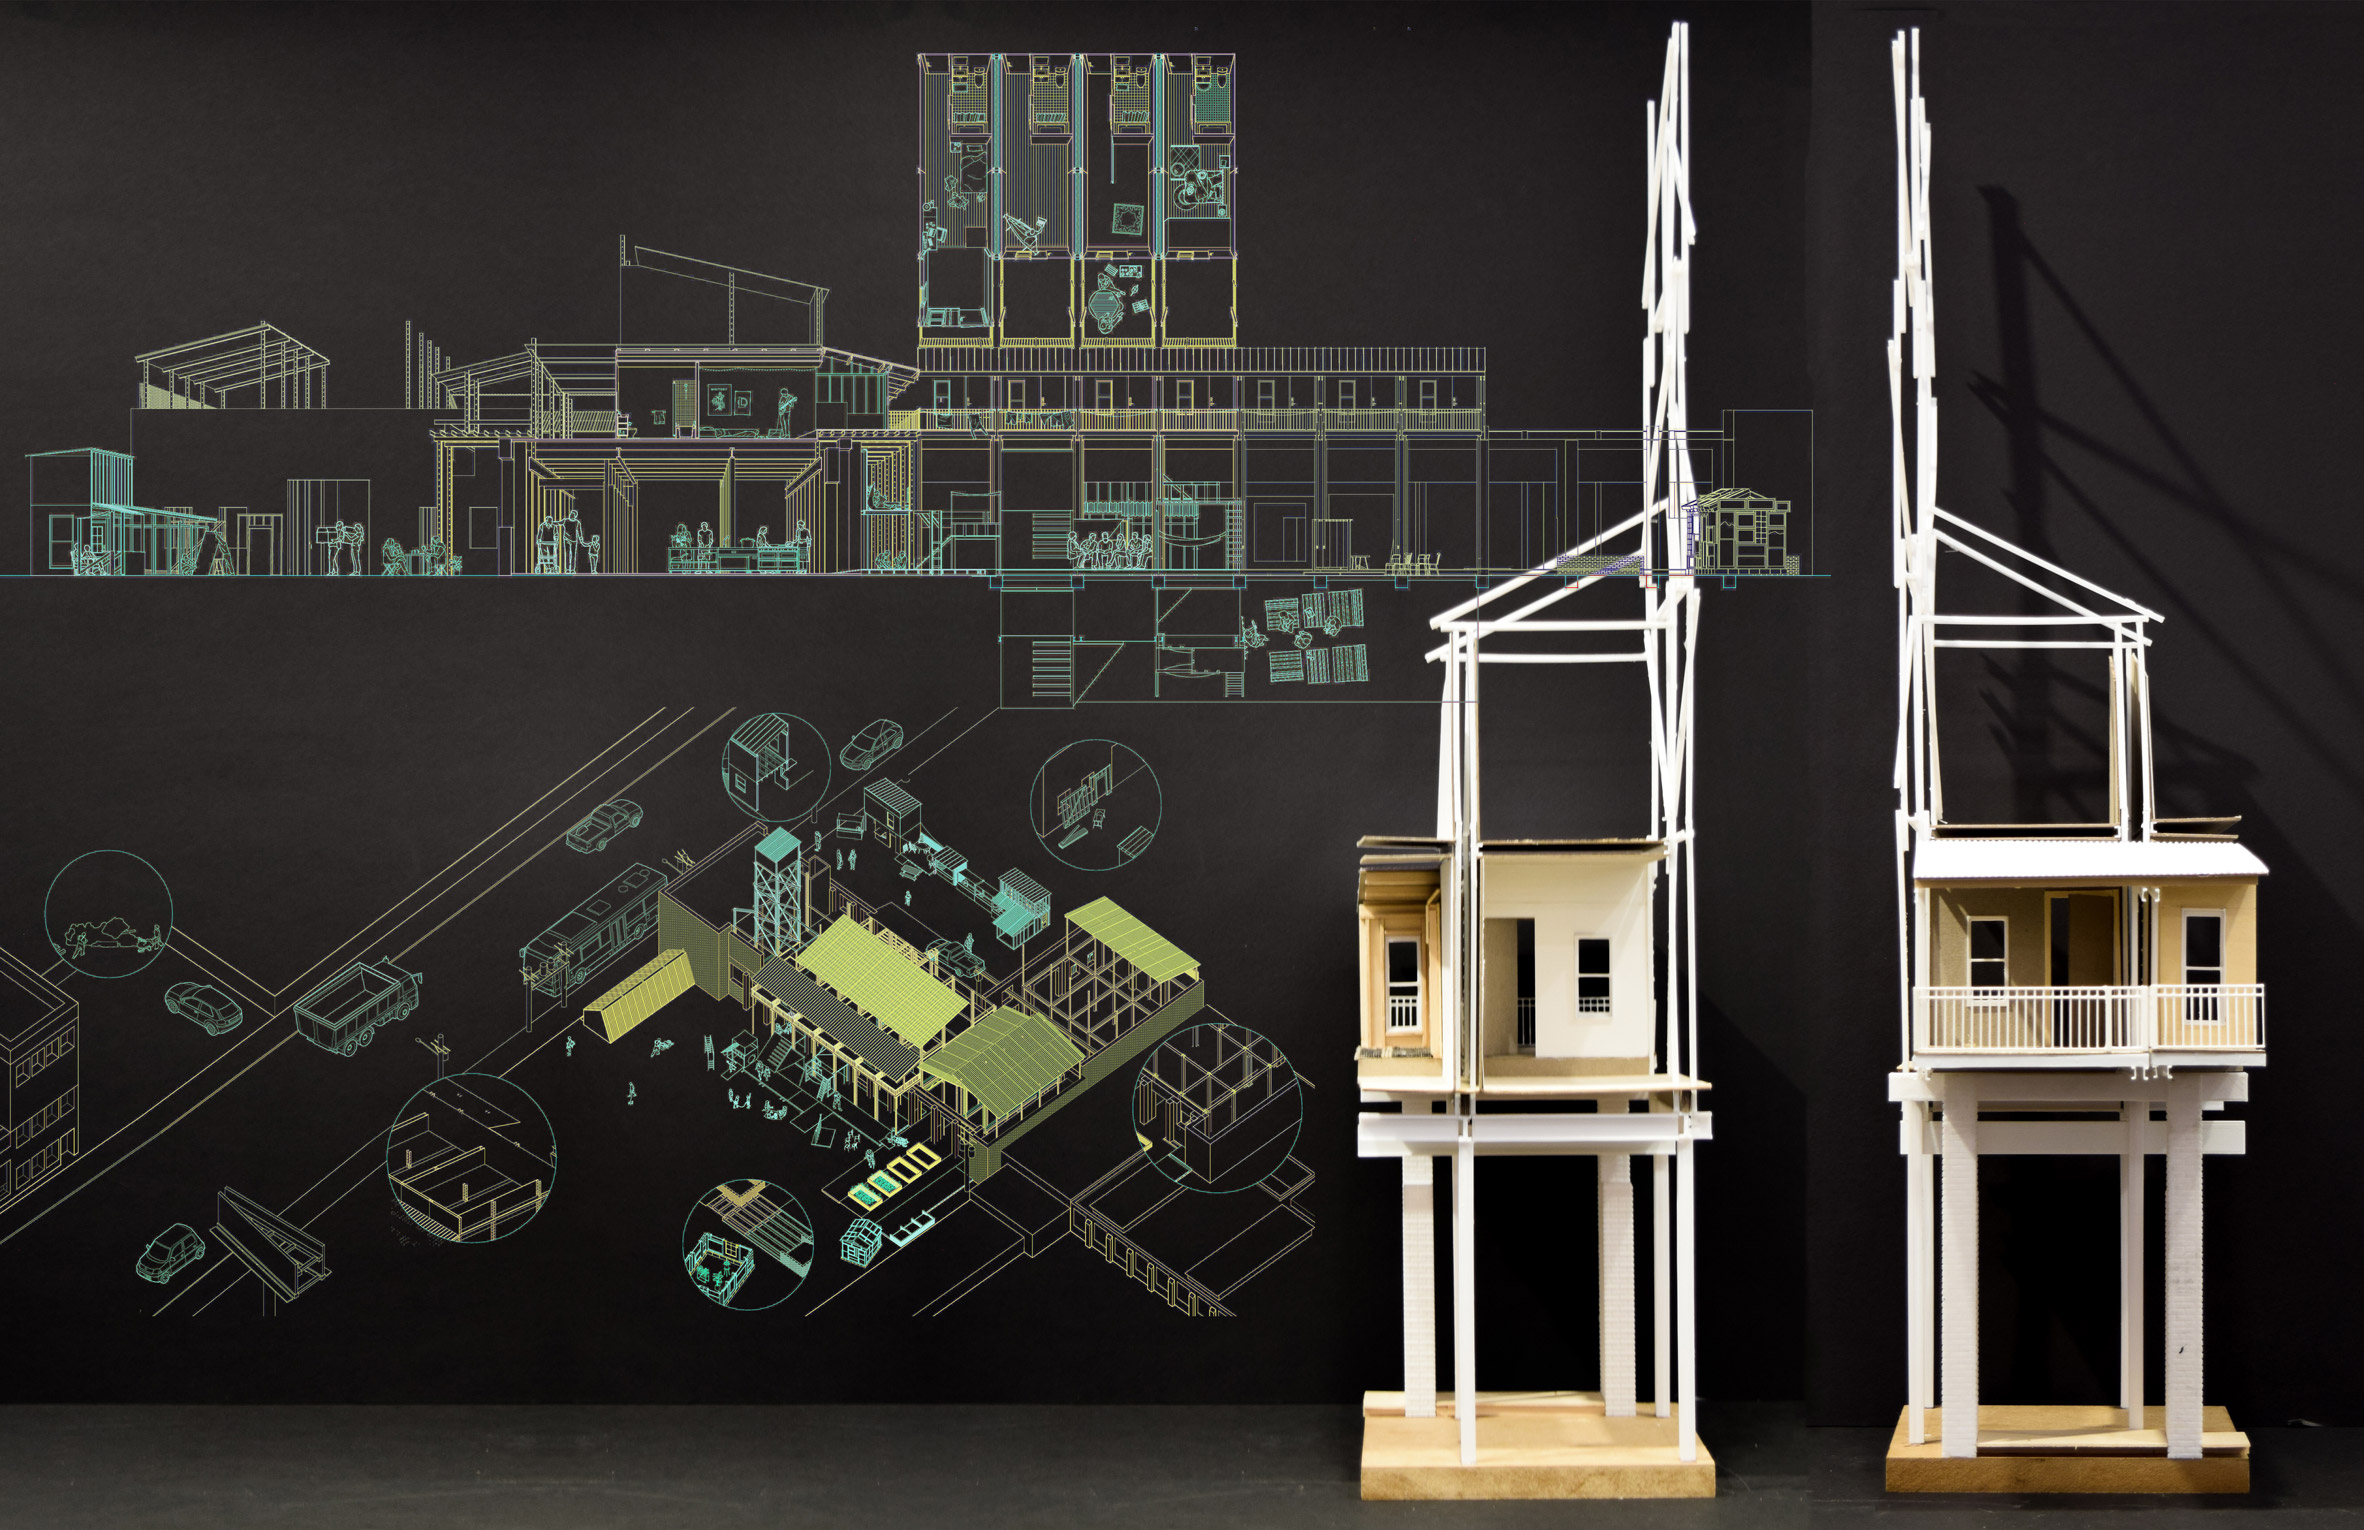 Architectural model and a sectional view of a multi-storey building